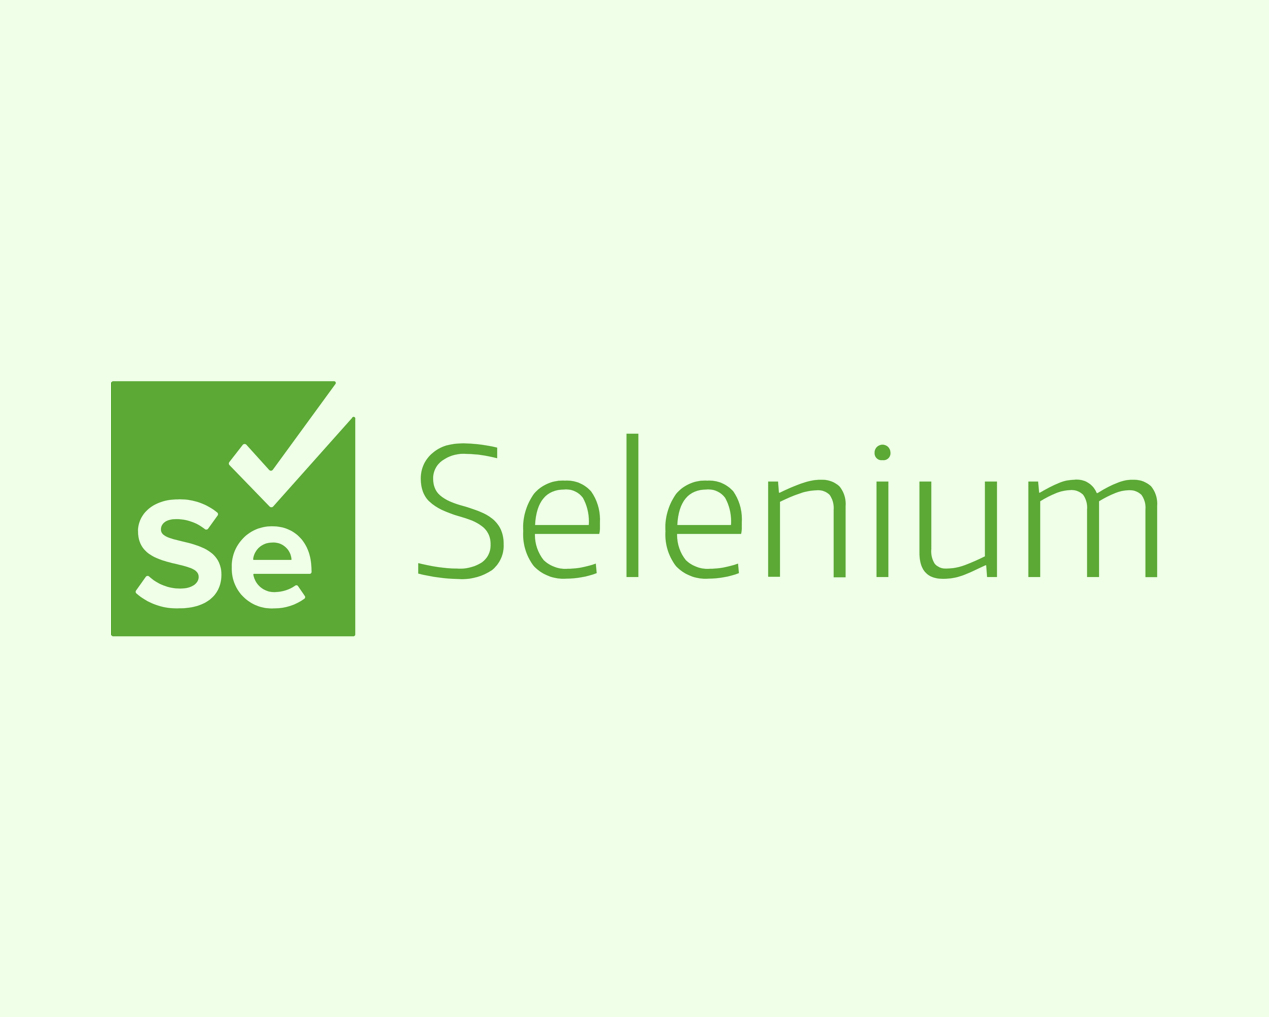 WebdriverIO Tutorial With Examples For Selenium Testing